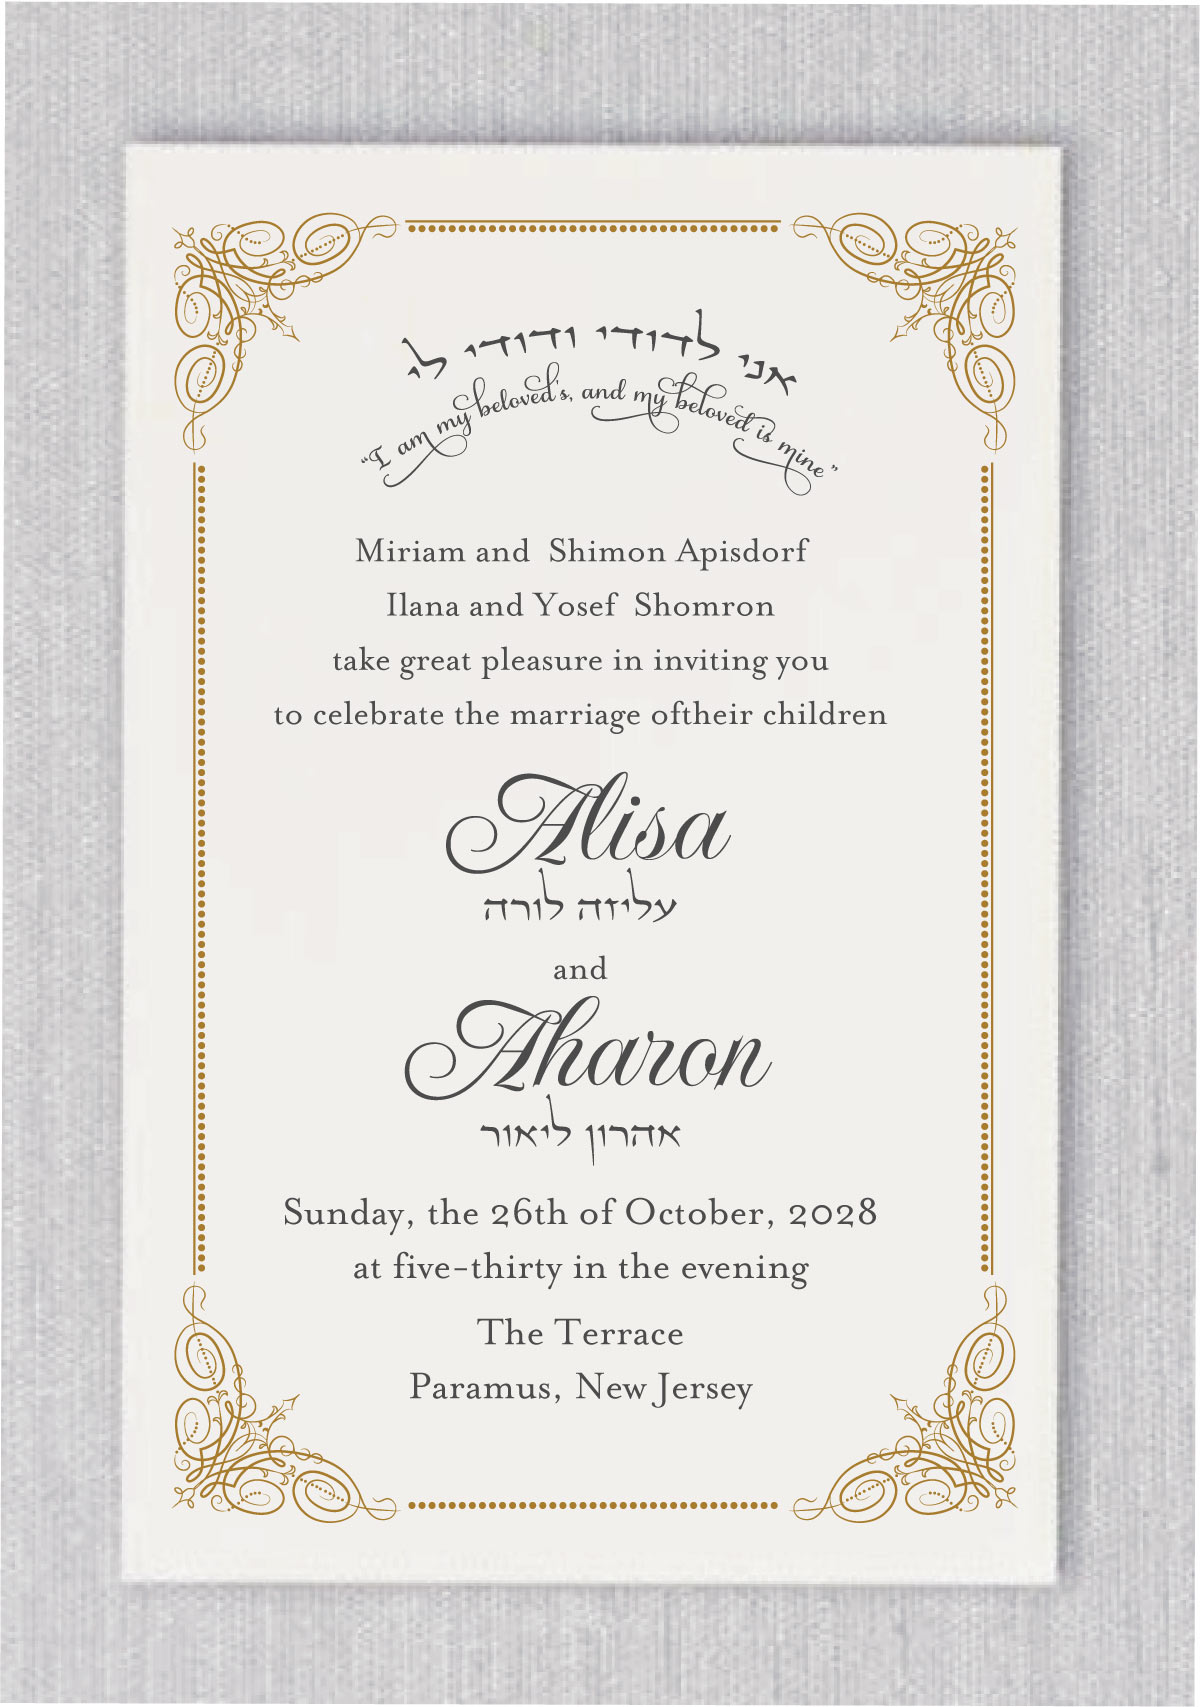 Vintage Antique Gold Frame Jewish Wedding Invitation is a favorite in our Jewish wedding simple but elegant wedding affair. Here, we gave it the “modern, simple and elegant affair” treatment, making it the perfect invitation suite for an elegant, contemporary and fancy affair.